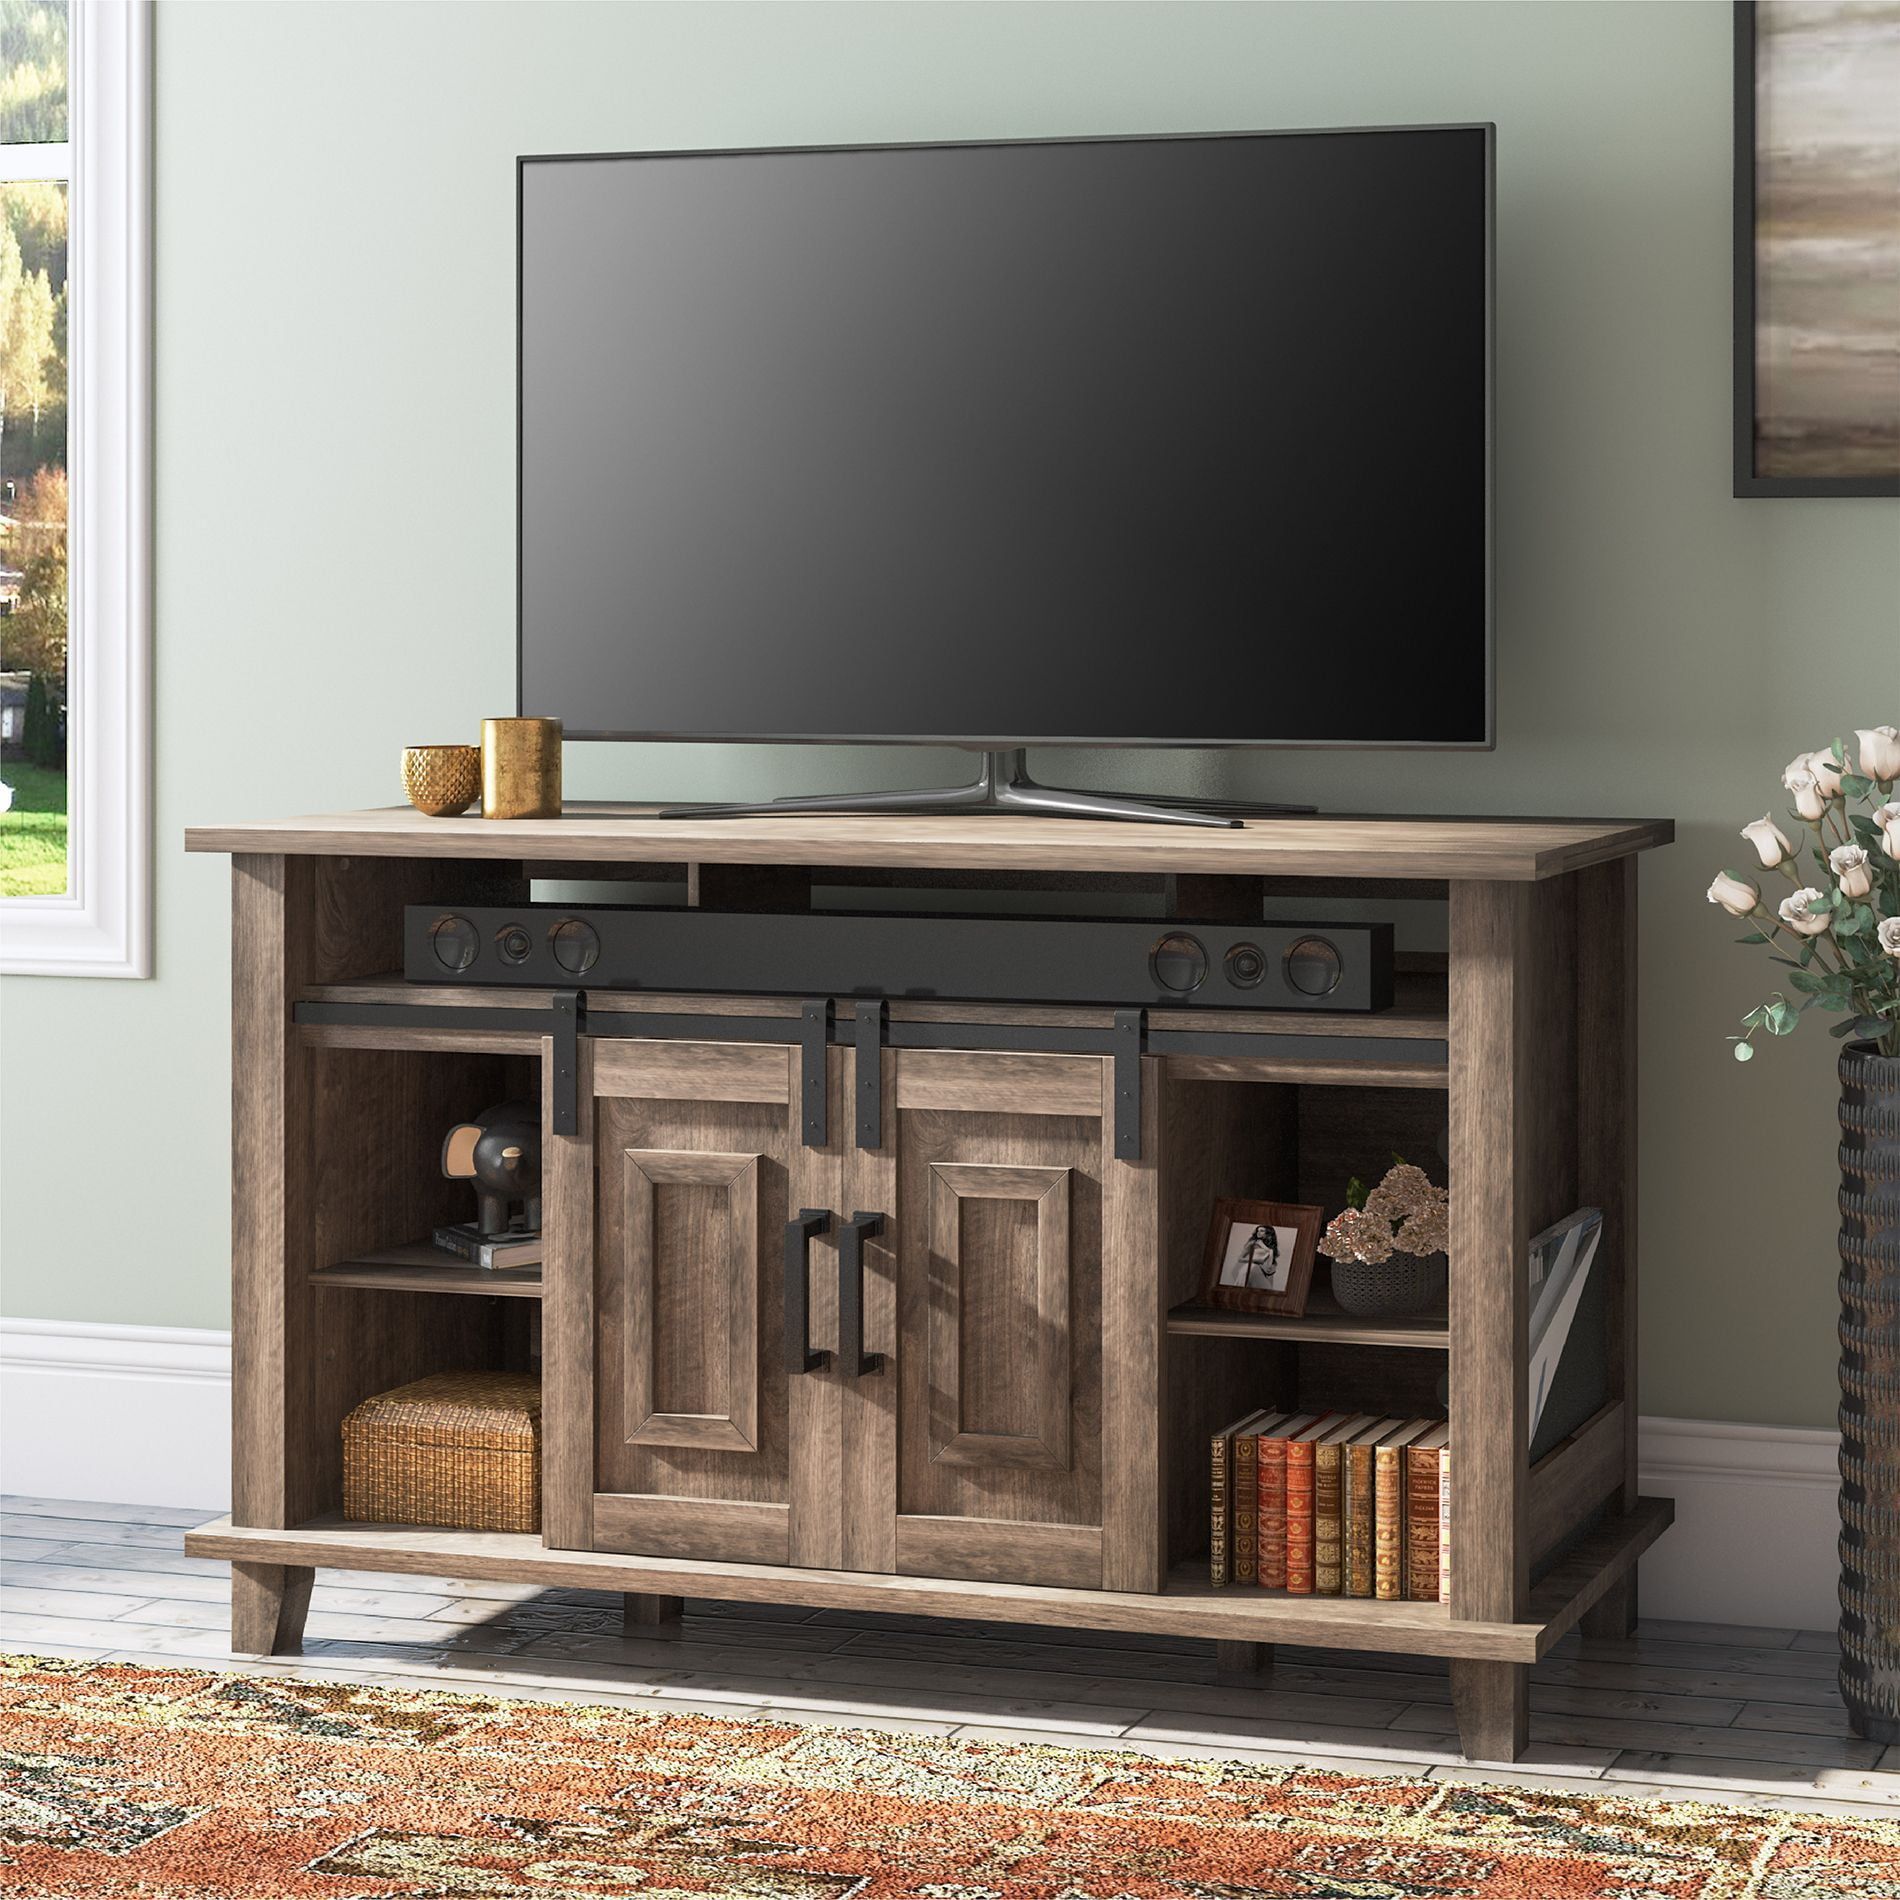 Wampat Farmhouse Sliding Barn Door Tv Stand, Gray Wood Tv Stands For 60 Within Modern Farmhouse Rustic Tv Stands (View 14 of 20)